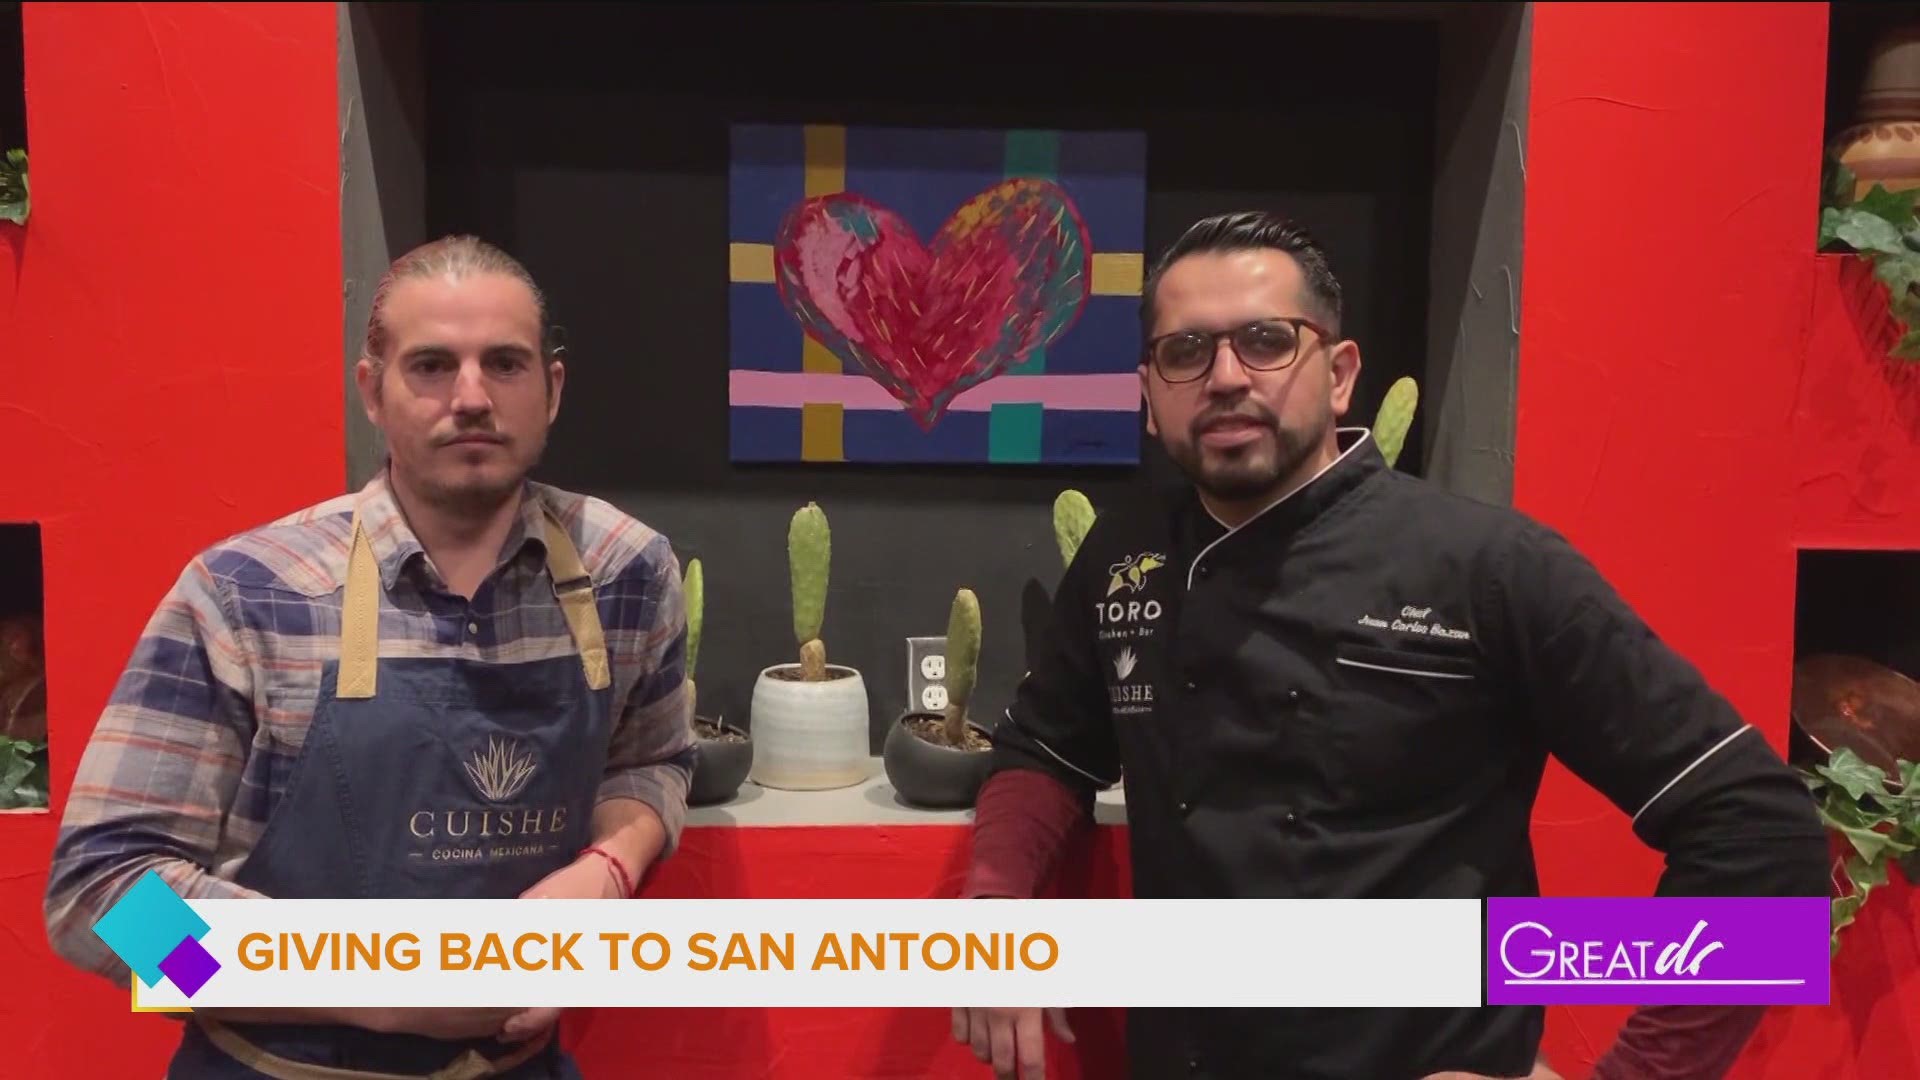 From restaurants to local celebs, people in San Antonio stepped up to help after the storm.